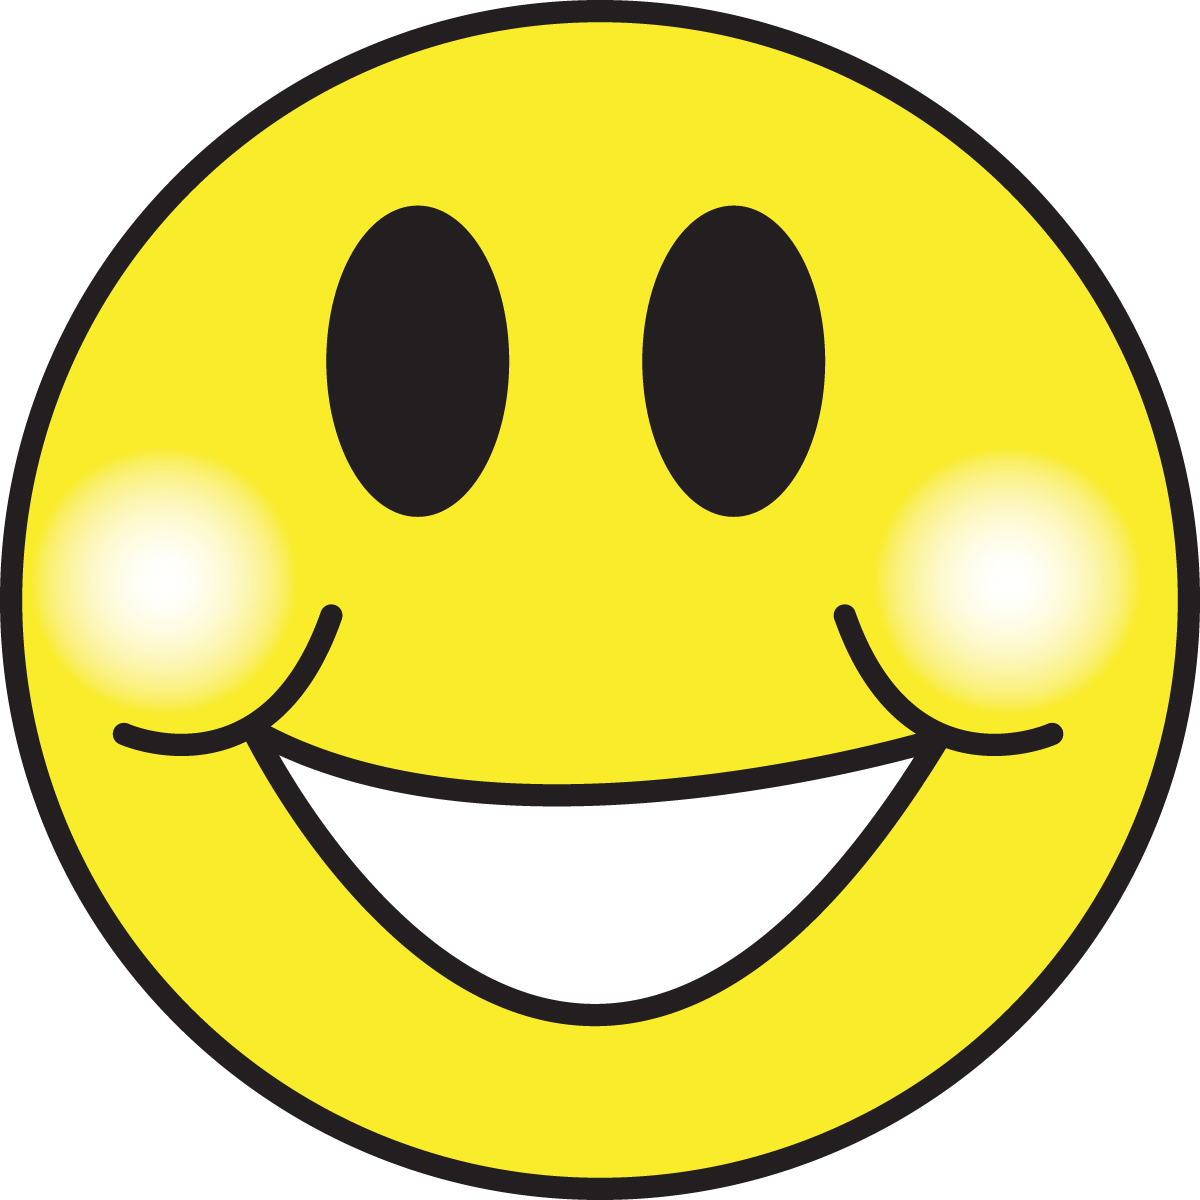 Smiley face clip art emotions free clipart images 2